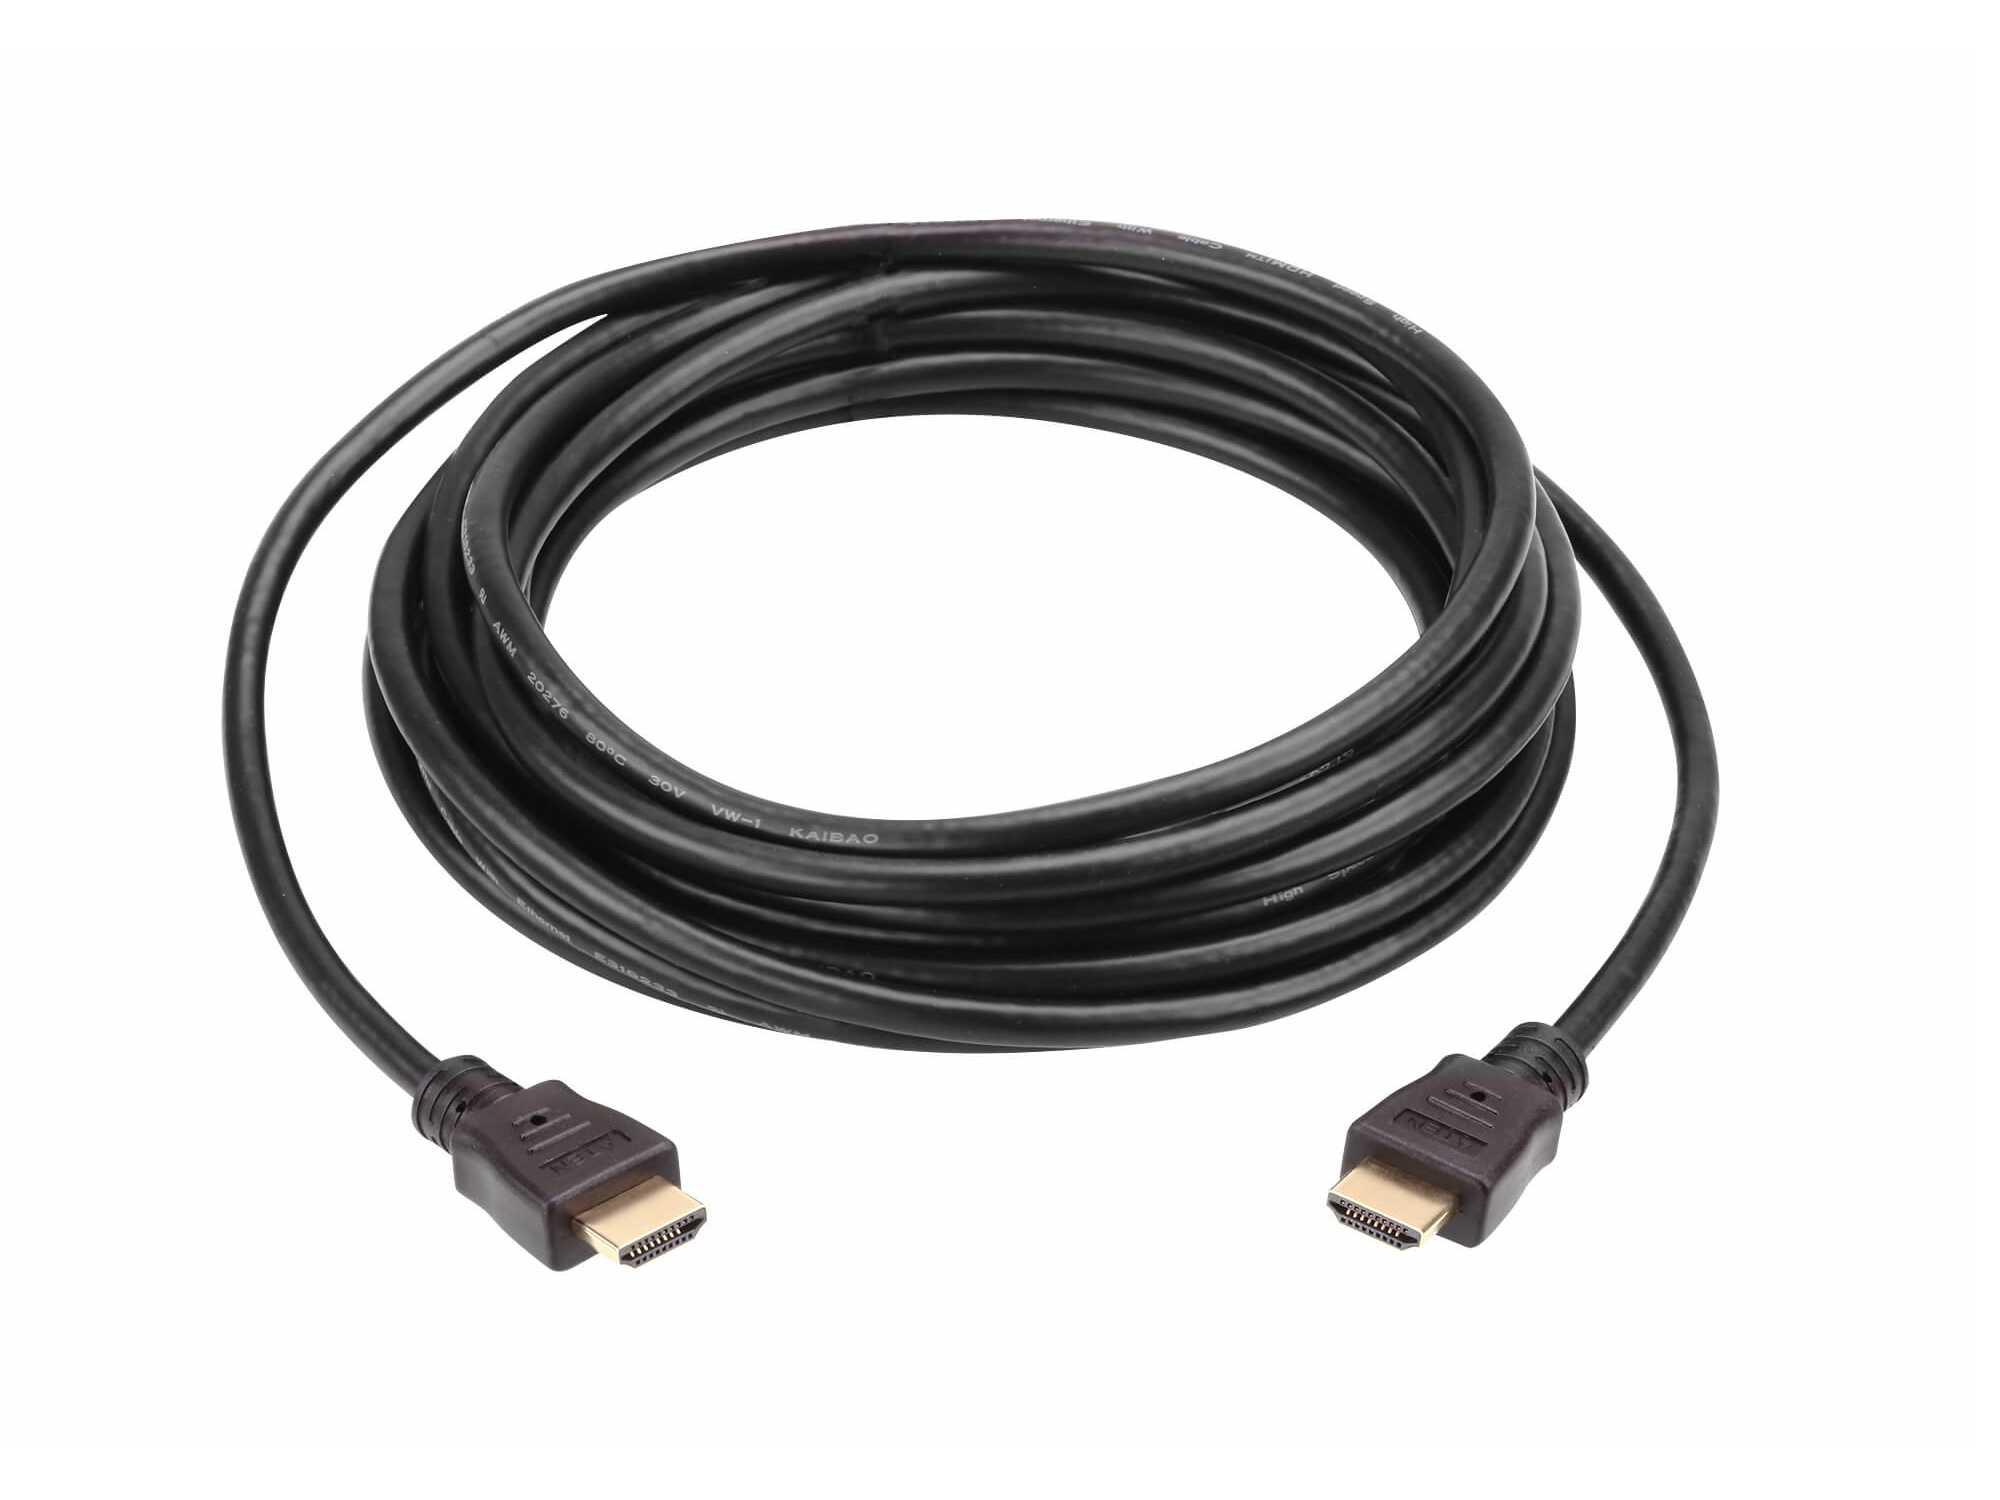 2L7D20H 20m High Speed HDMI Cable with Ethernet by Aten